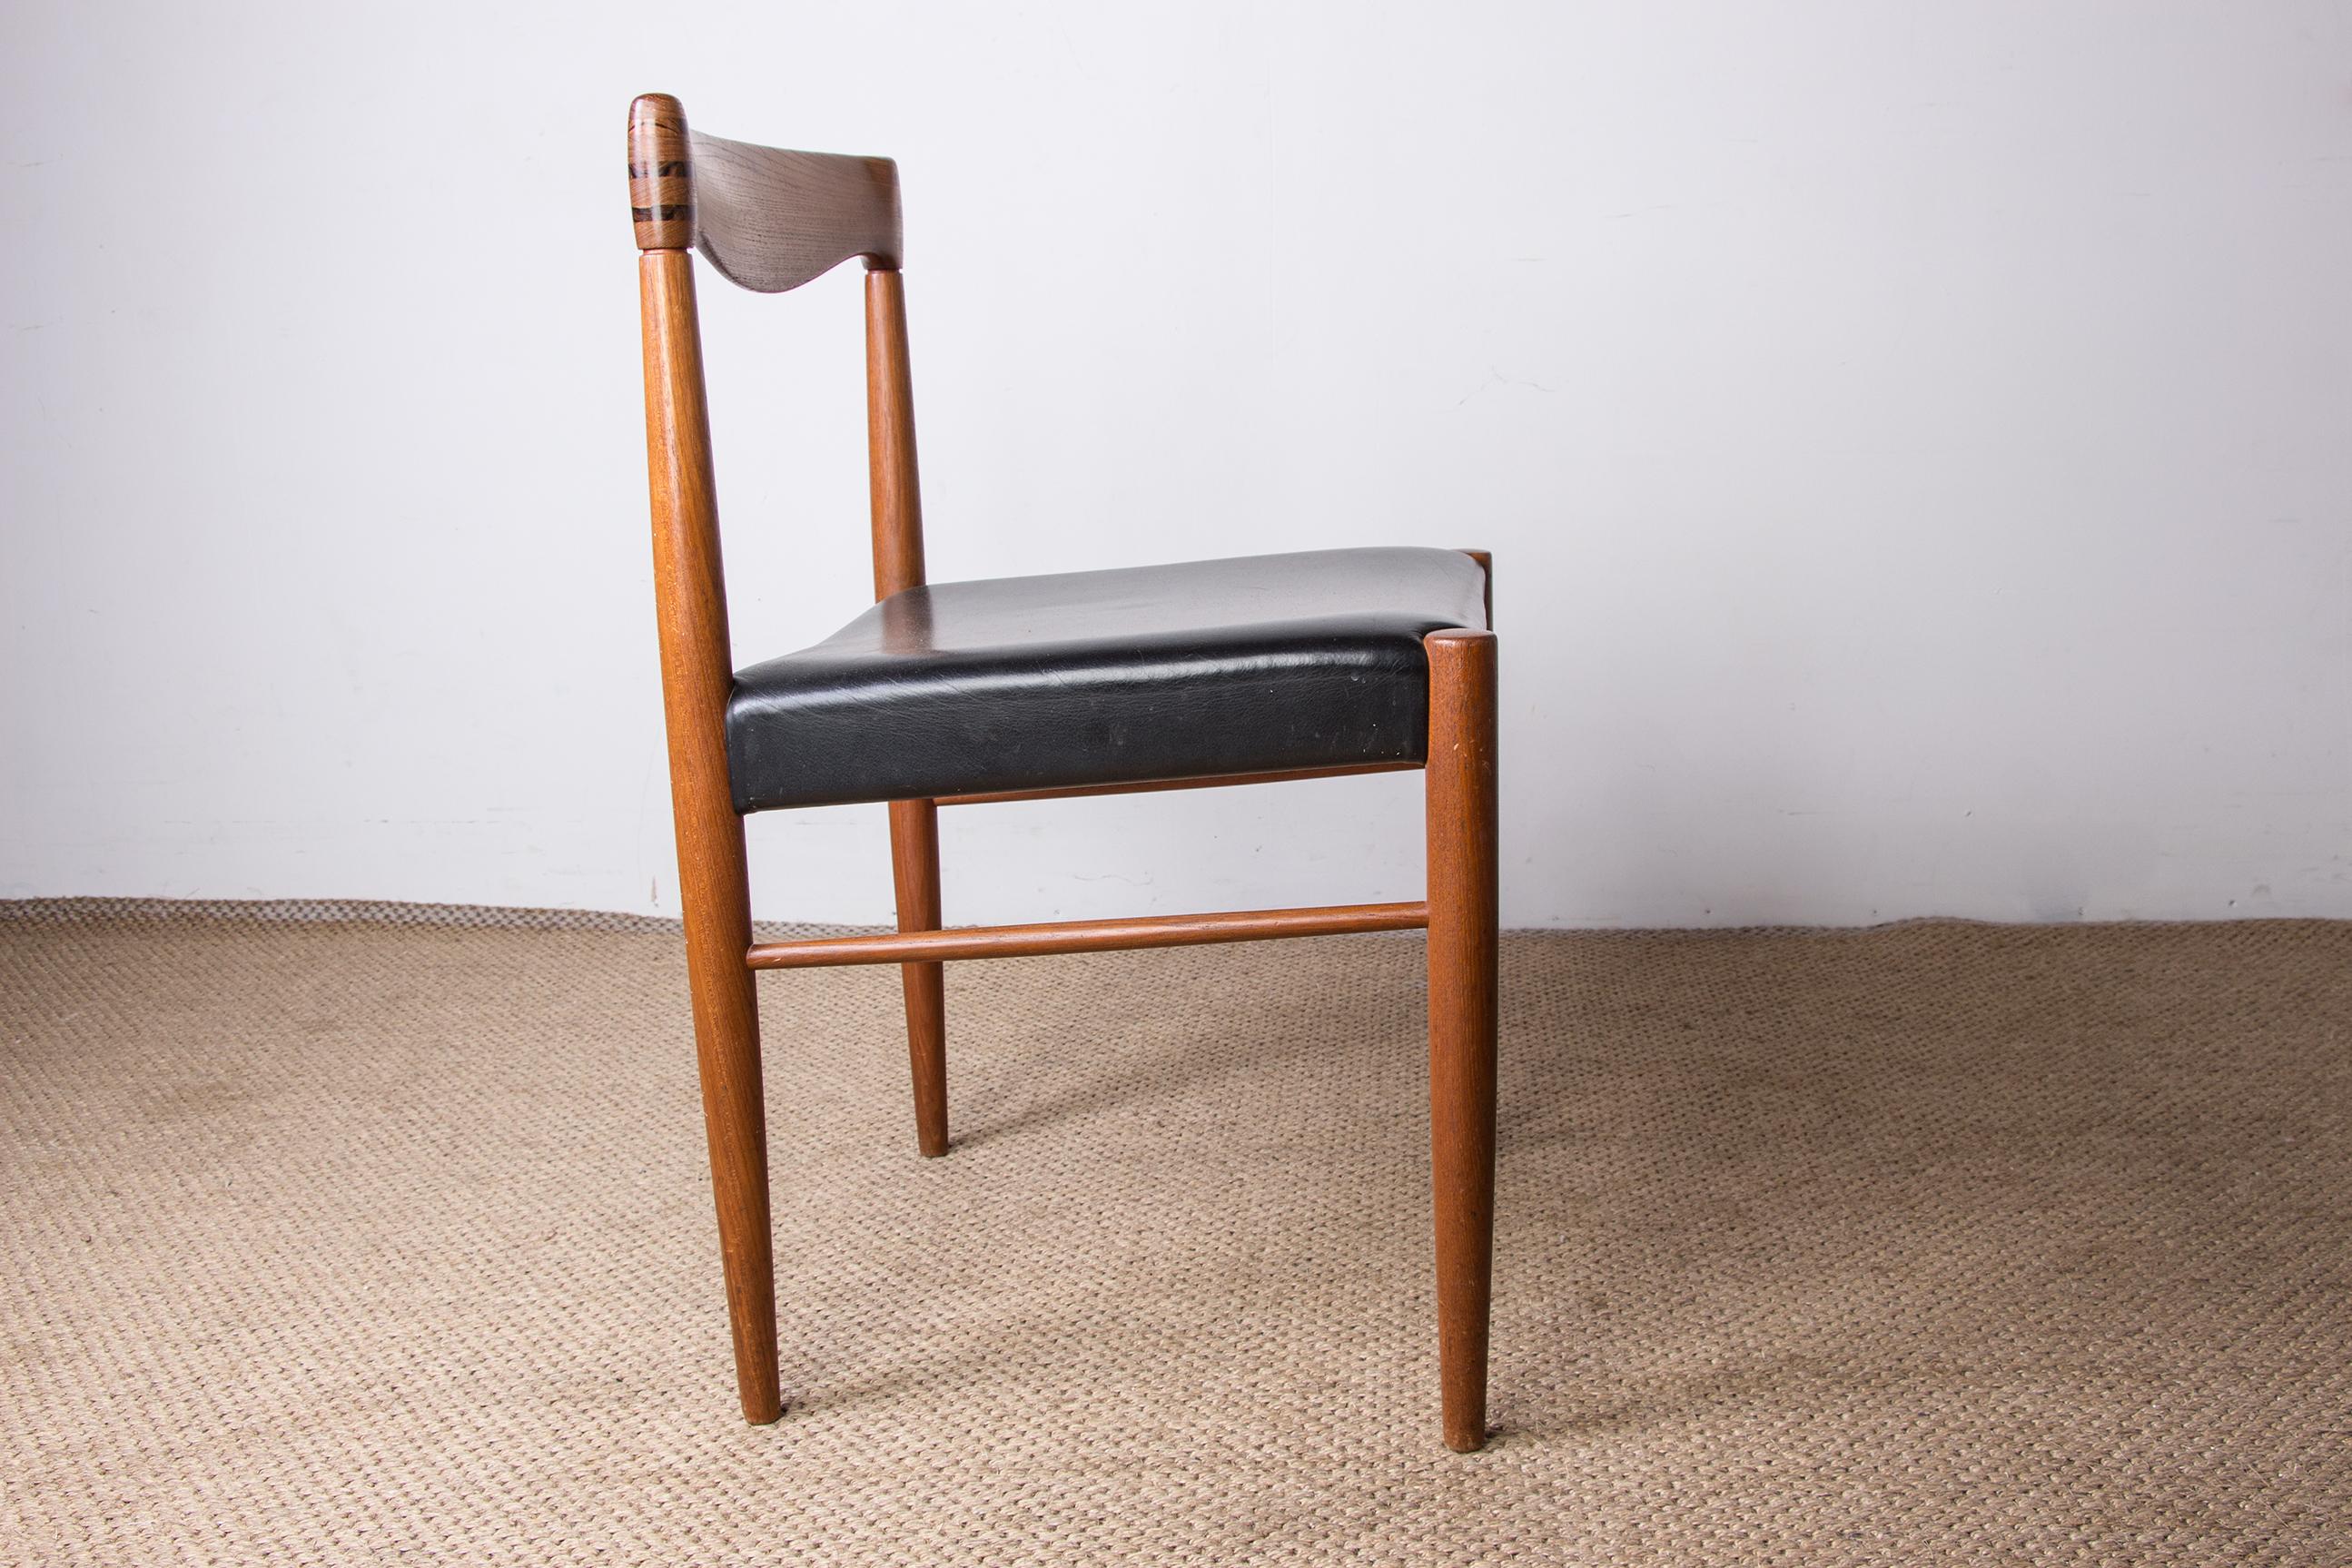 Series of 4 Danish Chairs in Oak and Black Leatherette by Henry Walter Klein for 2